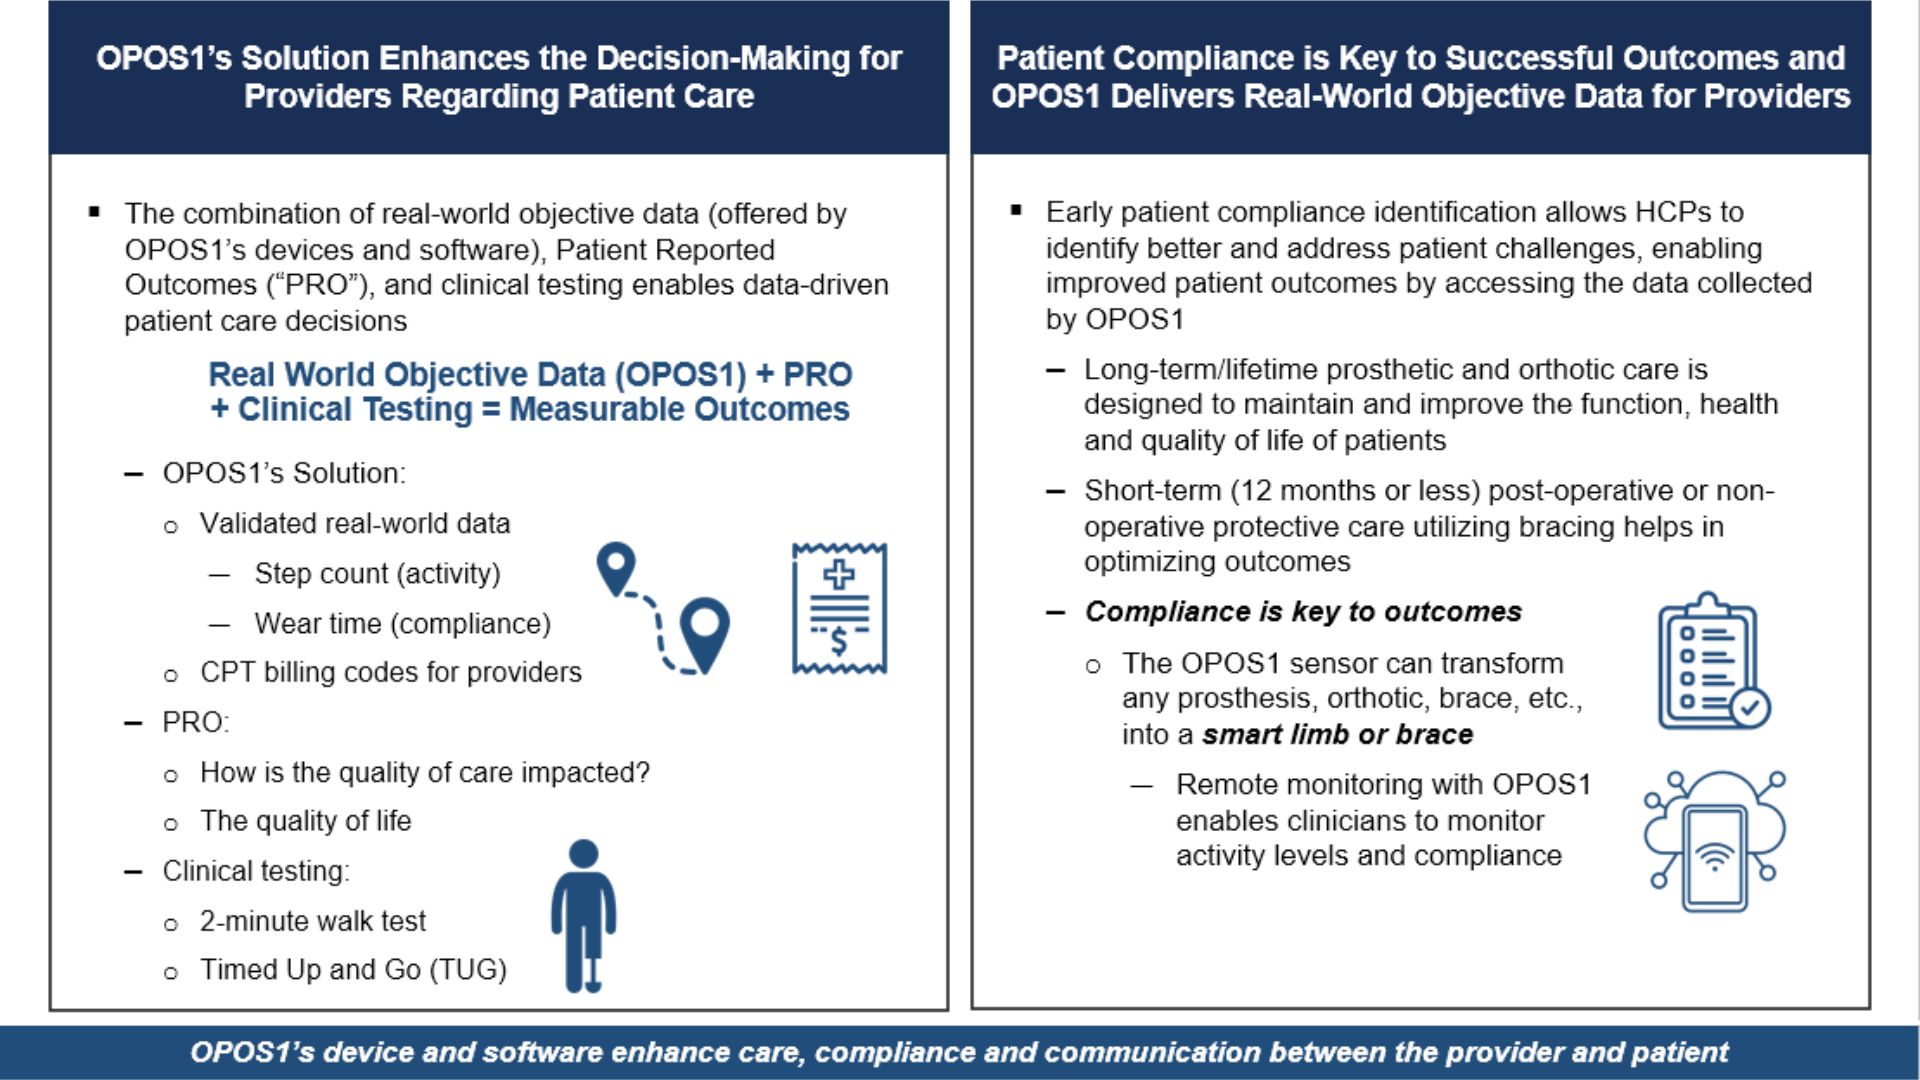 OPOS 1 Solutions and Patient Outcomes